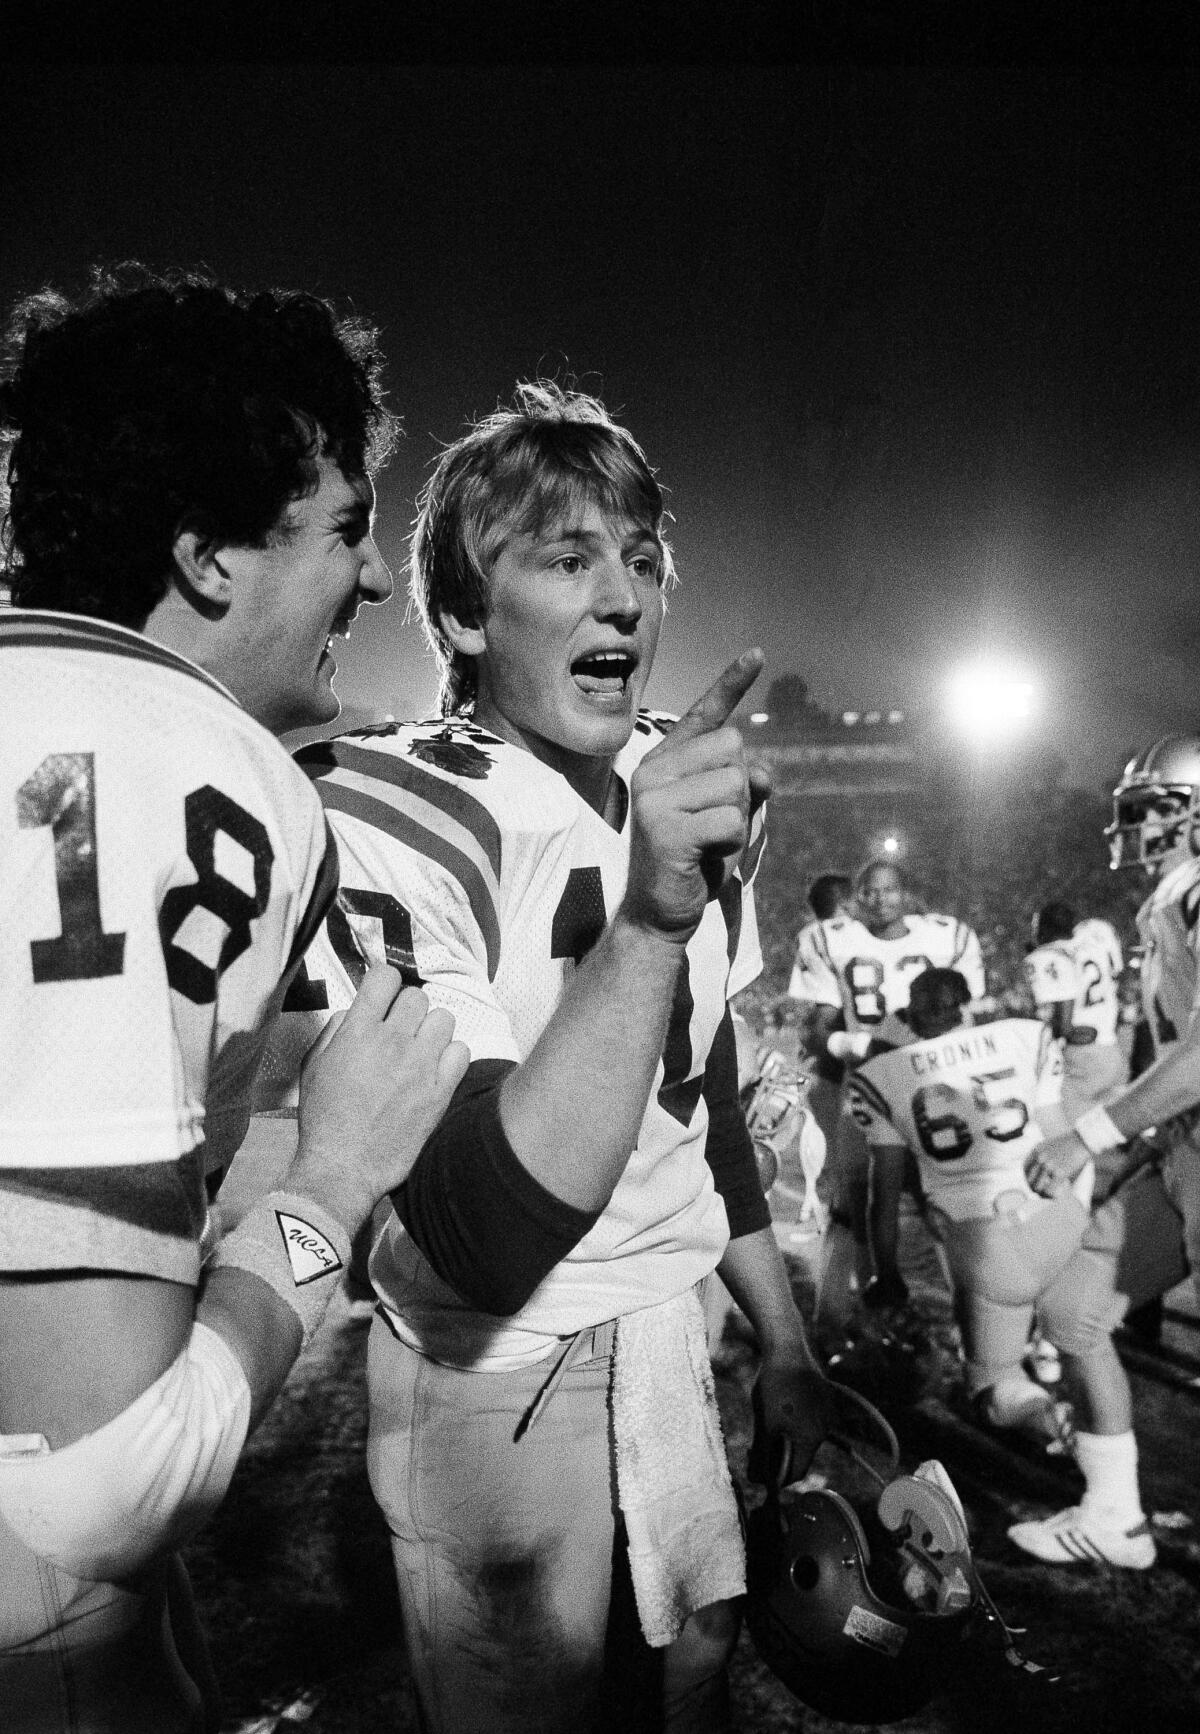 UCLA quarterback Rick Neuheisel during the closing moments of UCLA's 45-9 win over Illinois in the 1984 Rose Bowl game.